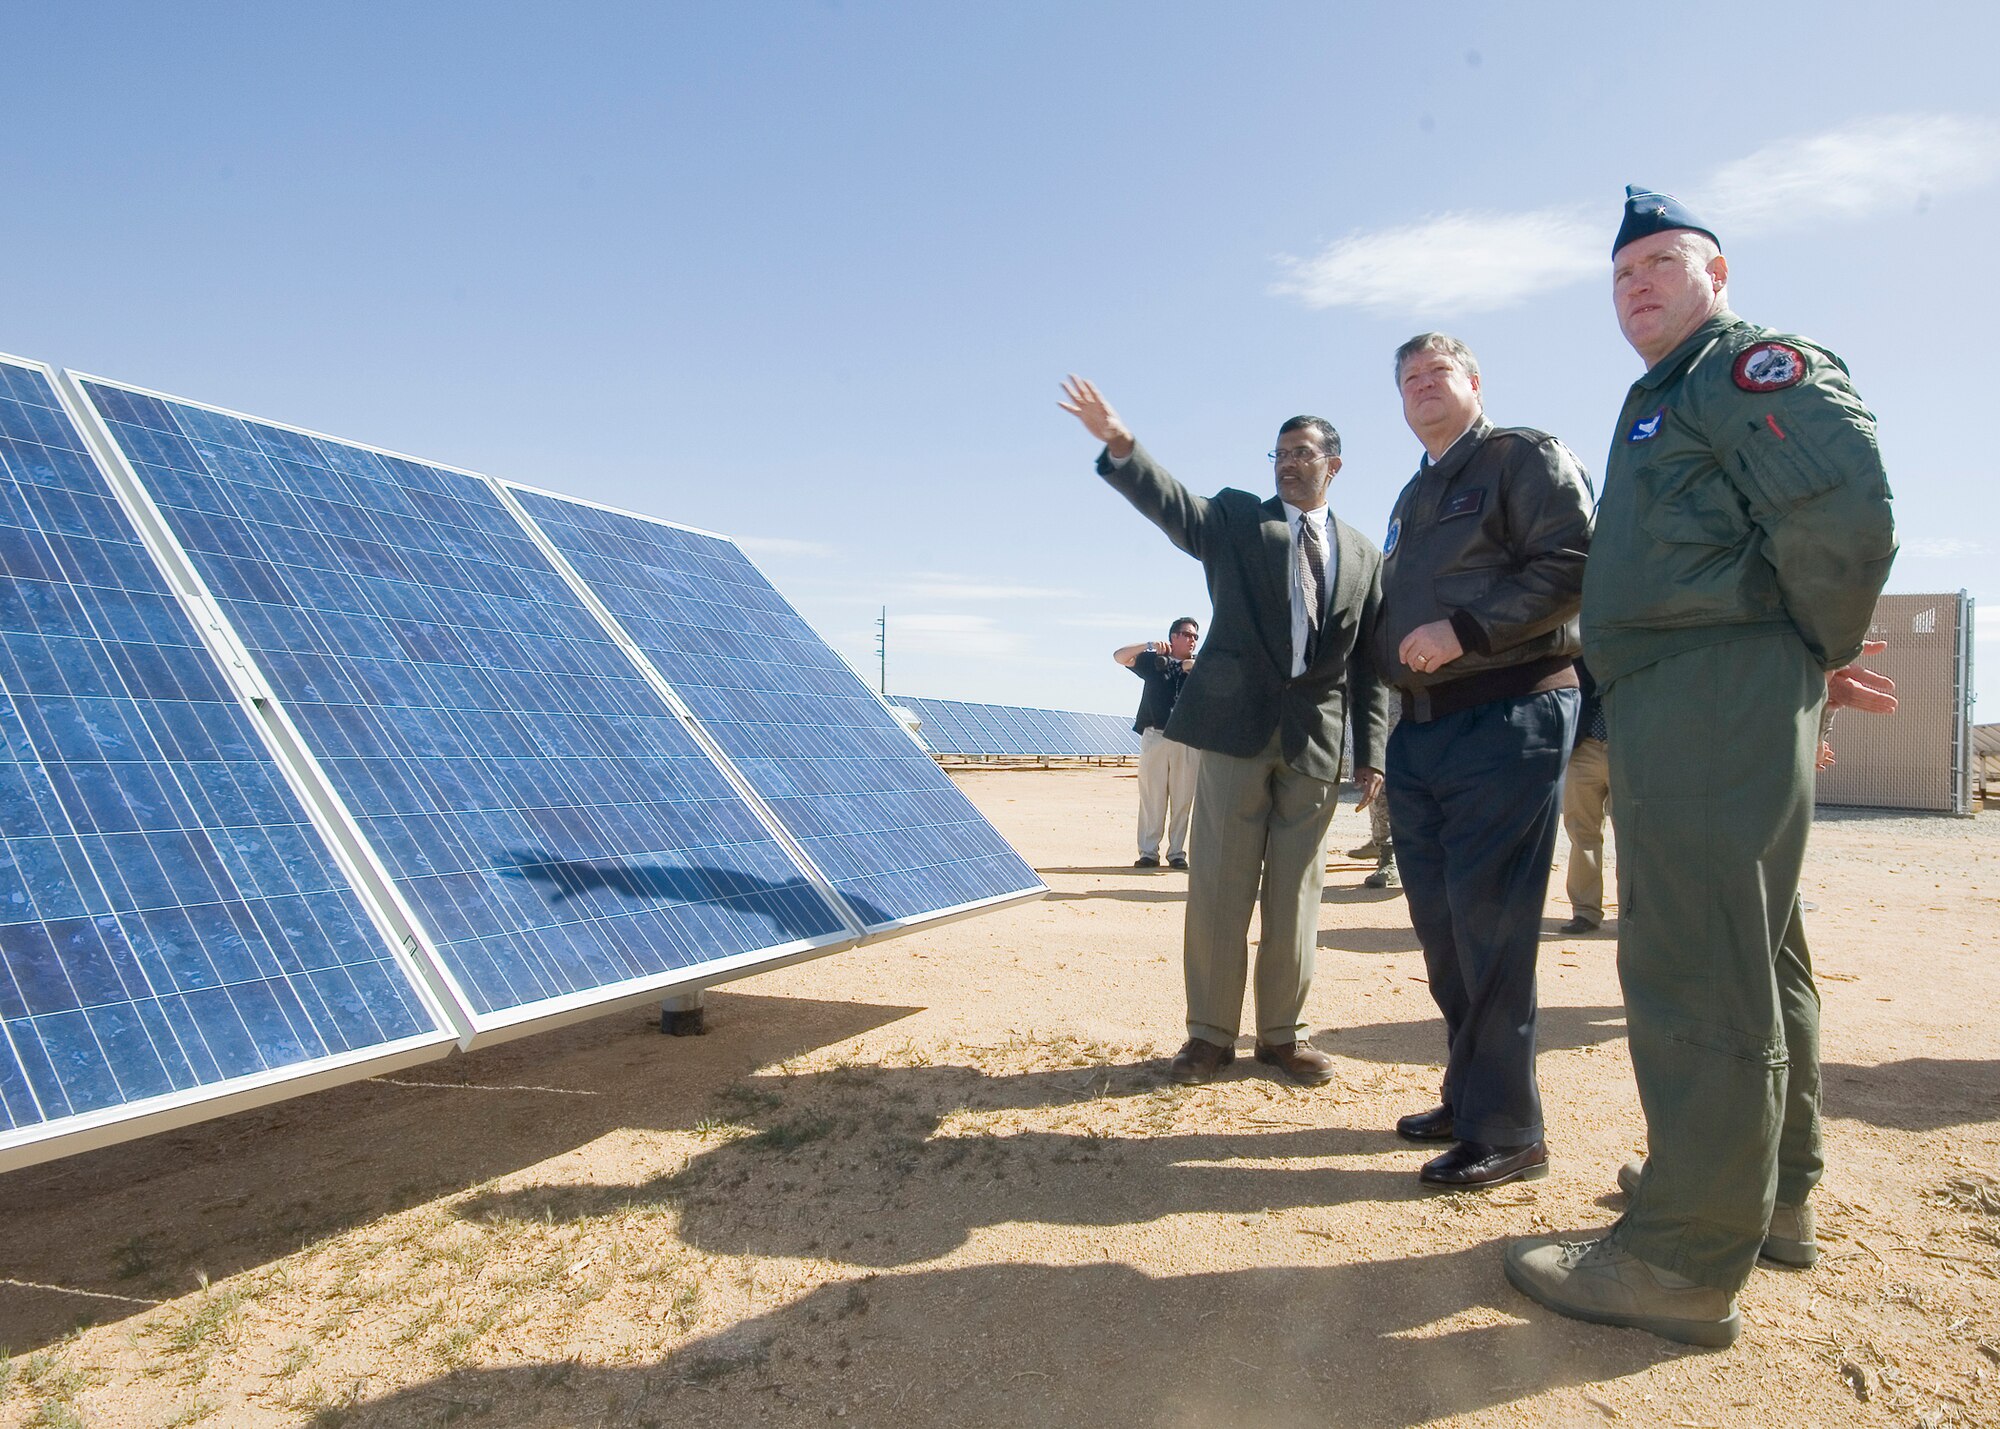 Yusuf Ahmed, 95th Civil Engineering electrical engineer (left), talks to Secretary of the Air Force Michael Donley about the three solar farms on Edwards Air Force Base March 27, as Brig. Gen. Robert C. Nolan II, Air Force Flight Test Center commander, looks on. The secretary cut a ceremonial ribbon at the Lancaster Blvd. solar farm to officially dedicate the three farms, which provide one megawatt each to the Edwards power grid. (U.S. Air Force photo/Rob Densmore)